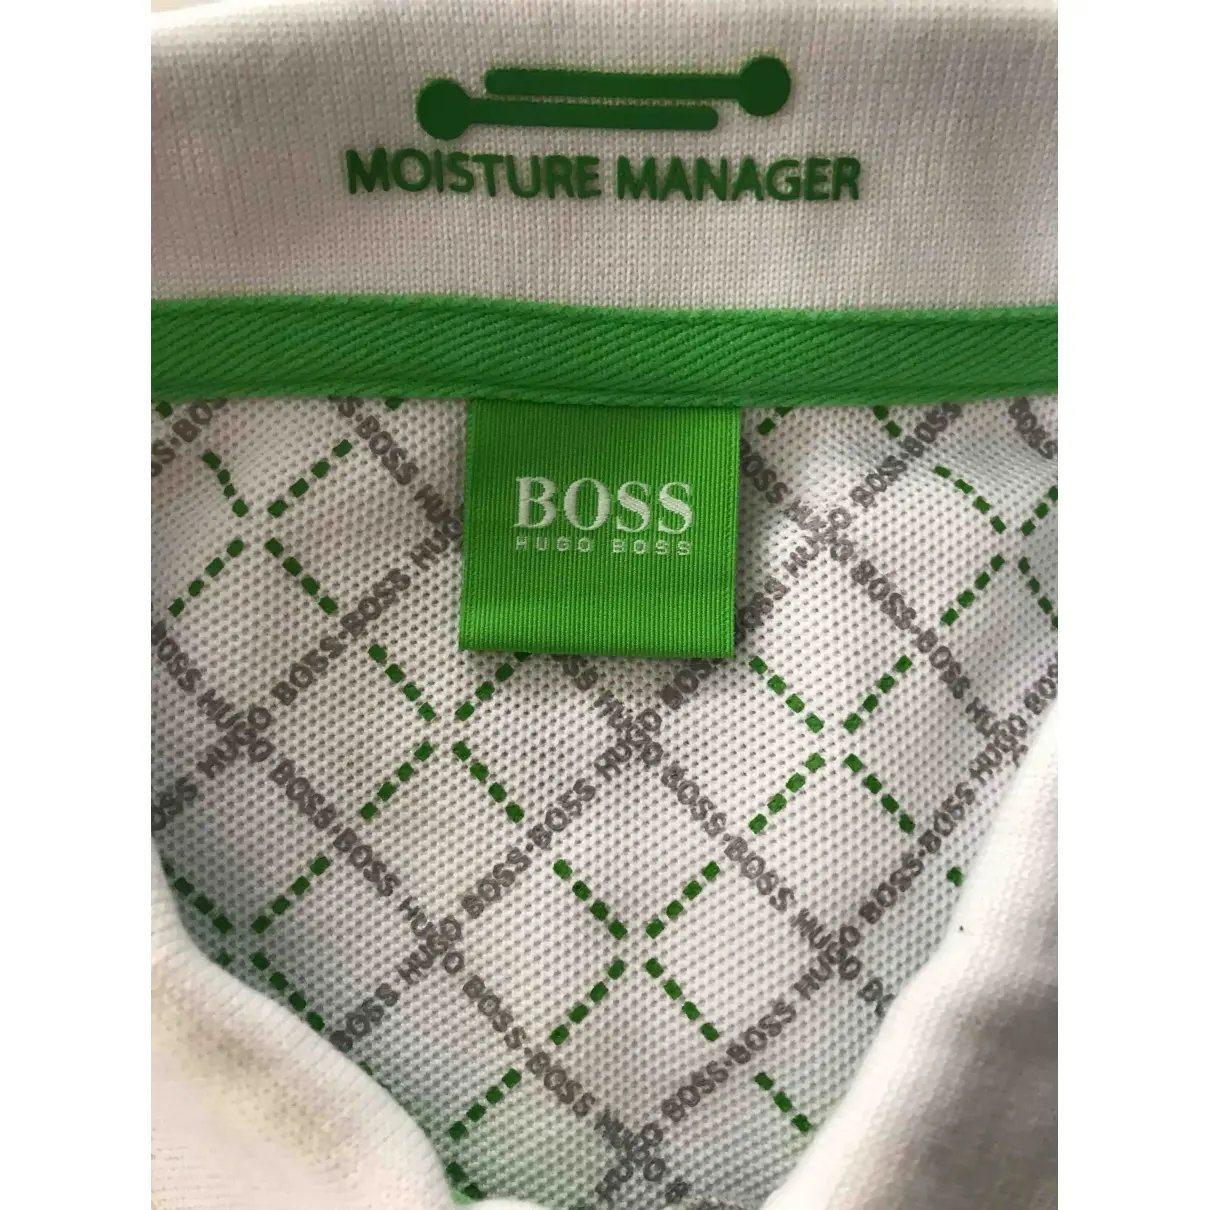 Boss Polo shirt for sale